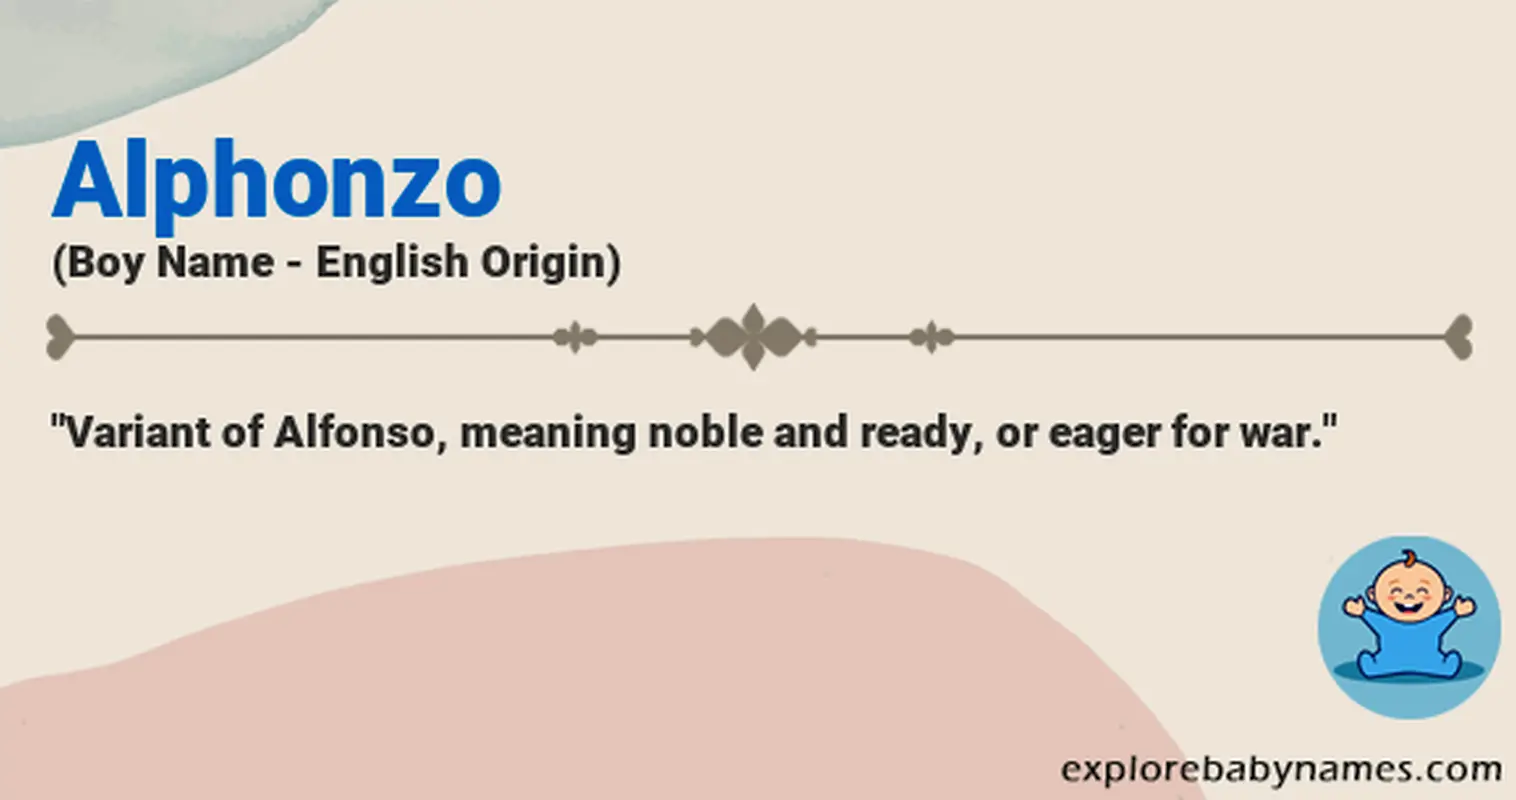 Meaning of Alphonzo